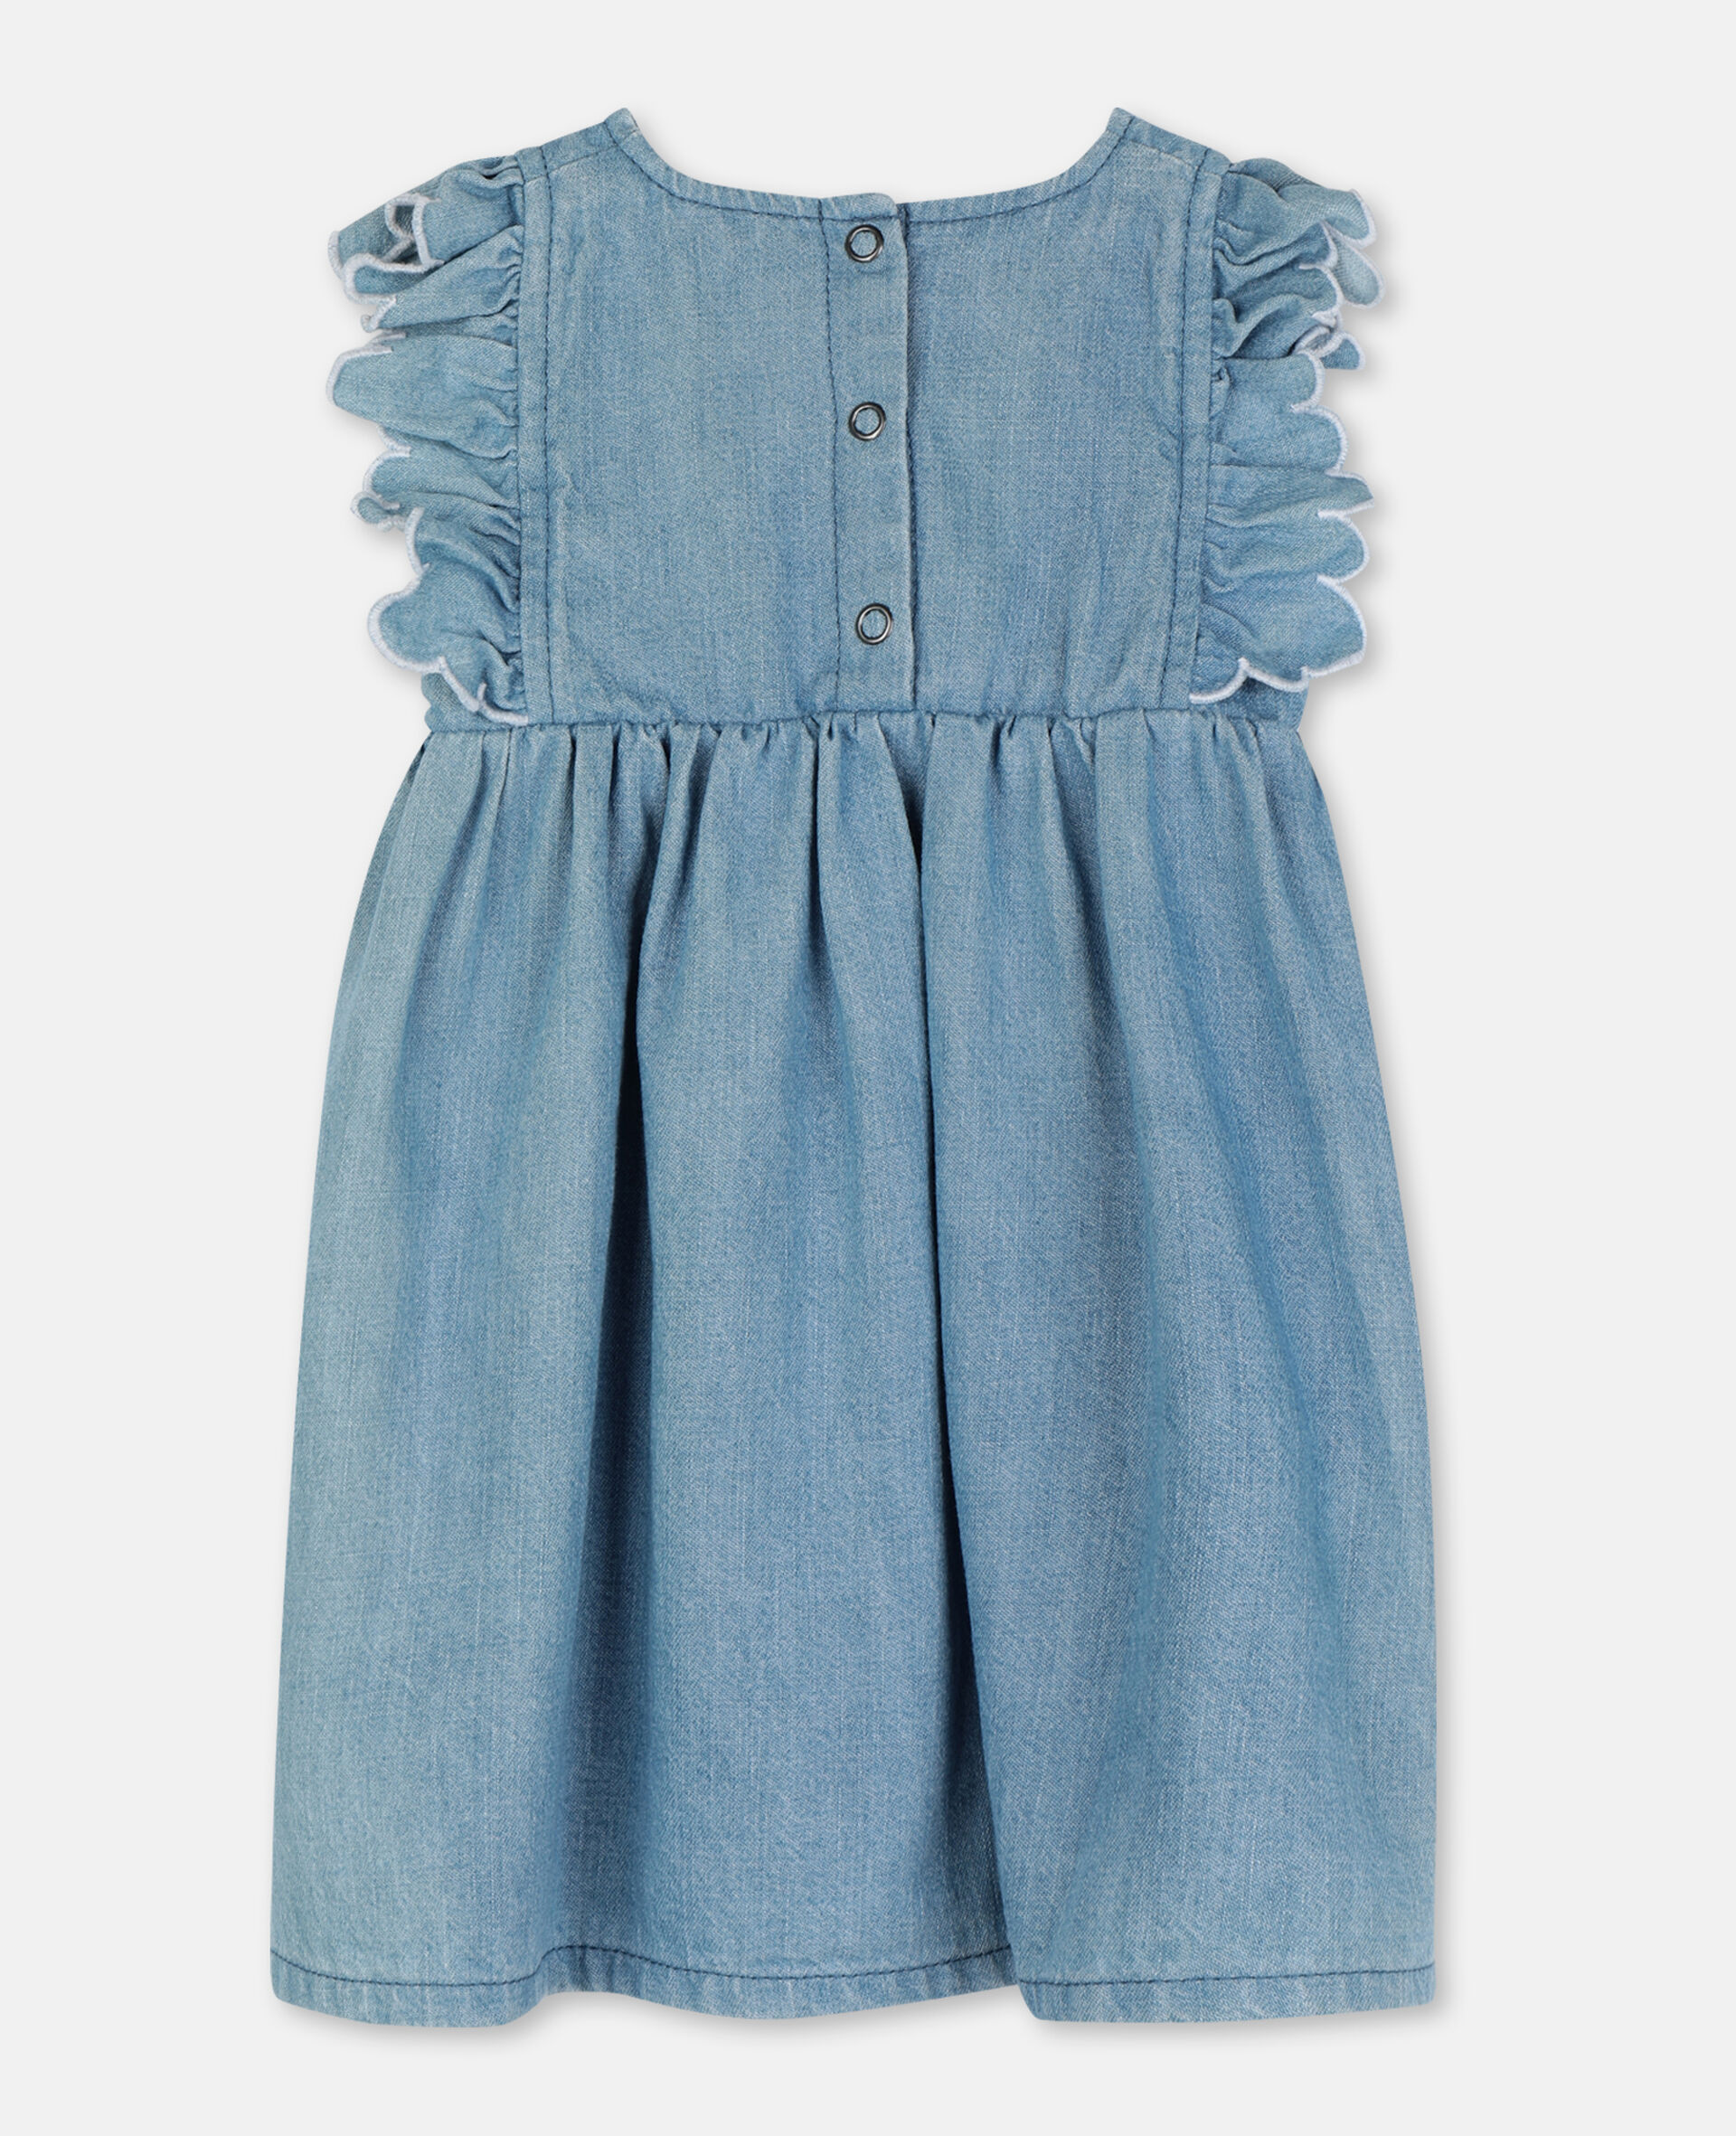 Butterfly Patch Denim Dress-Blue-large image number 3